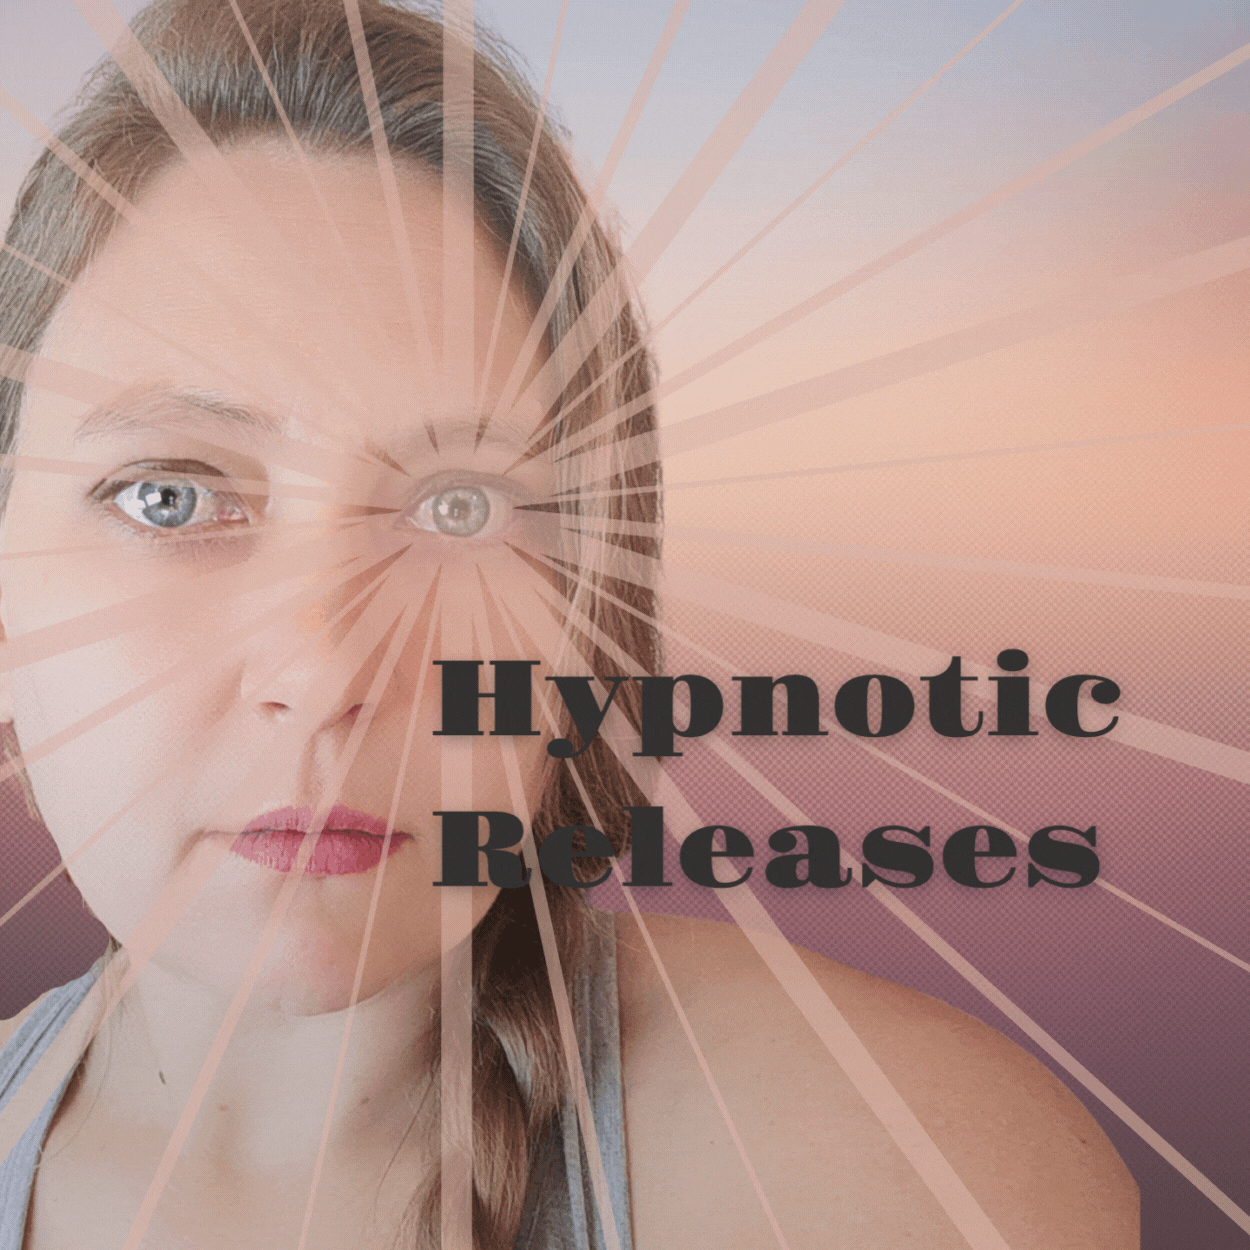 Upcoming Hypnotic Releases from Ms AmbreJade